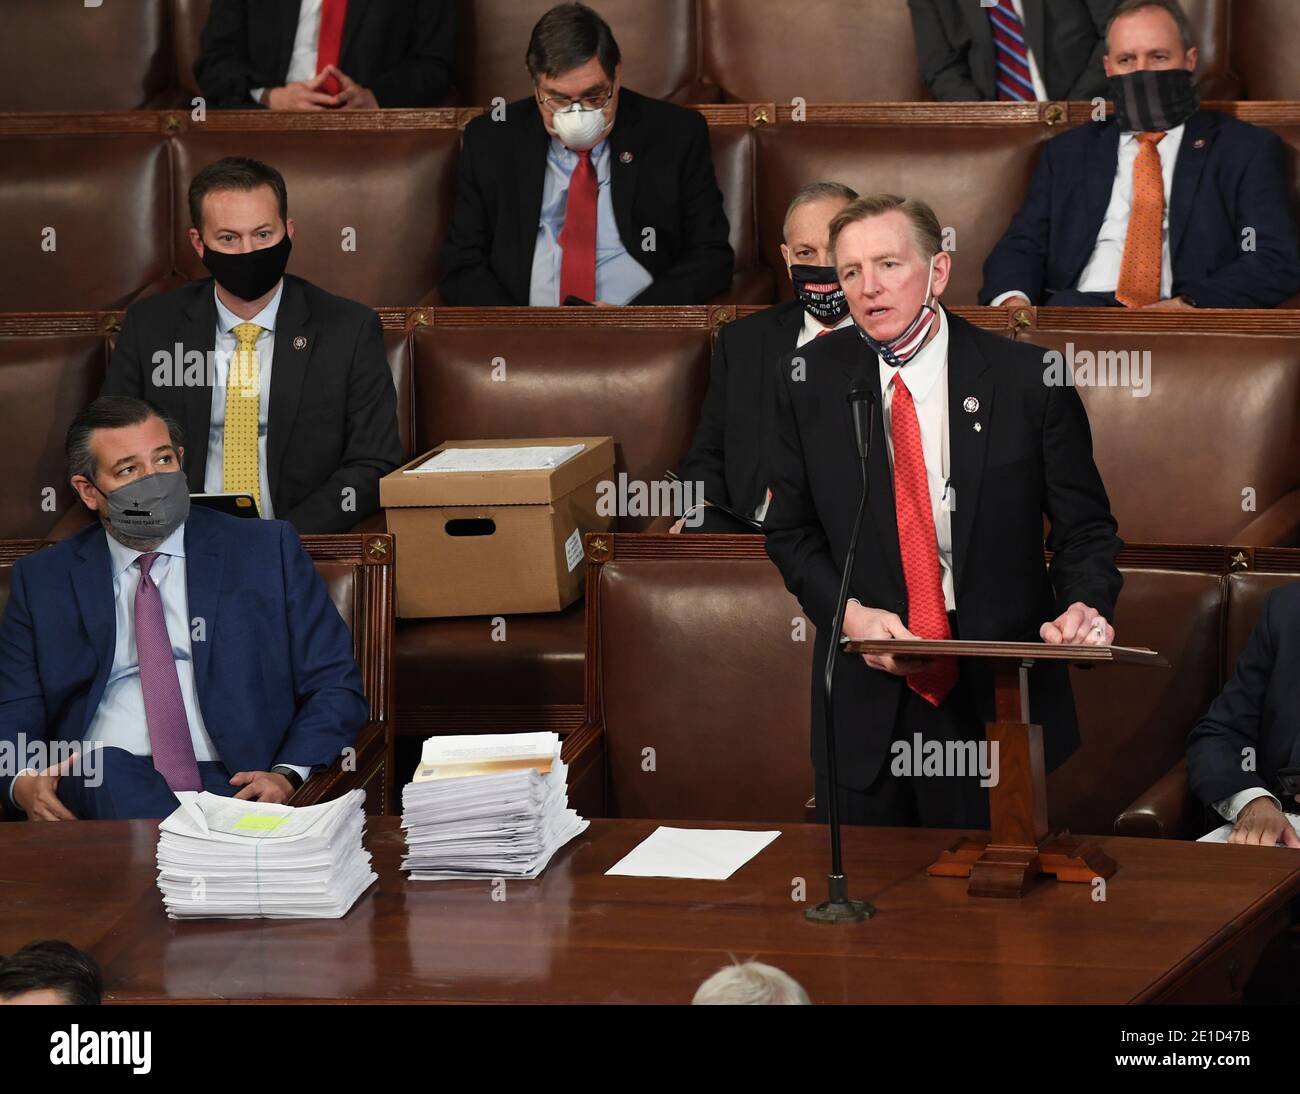 Washington, United States. 06th Jan, 2021. Rep. Paul Gosar, R-AZ, (R) and Sen. Ted Cruz, R-TX, (L) object too certification of Arizona's Electoral College votes during a joint session of Congtess the U.S. Capitol in Washington, DC on Wednesday, January 6, 2021. Congress split into two sessions to debate the issue. Photo by Pat Benic/UPI Credit: UPI/Alamy Live News Stock Photo